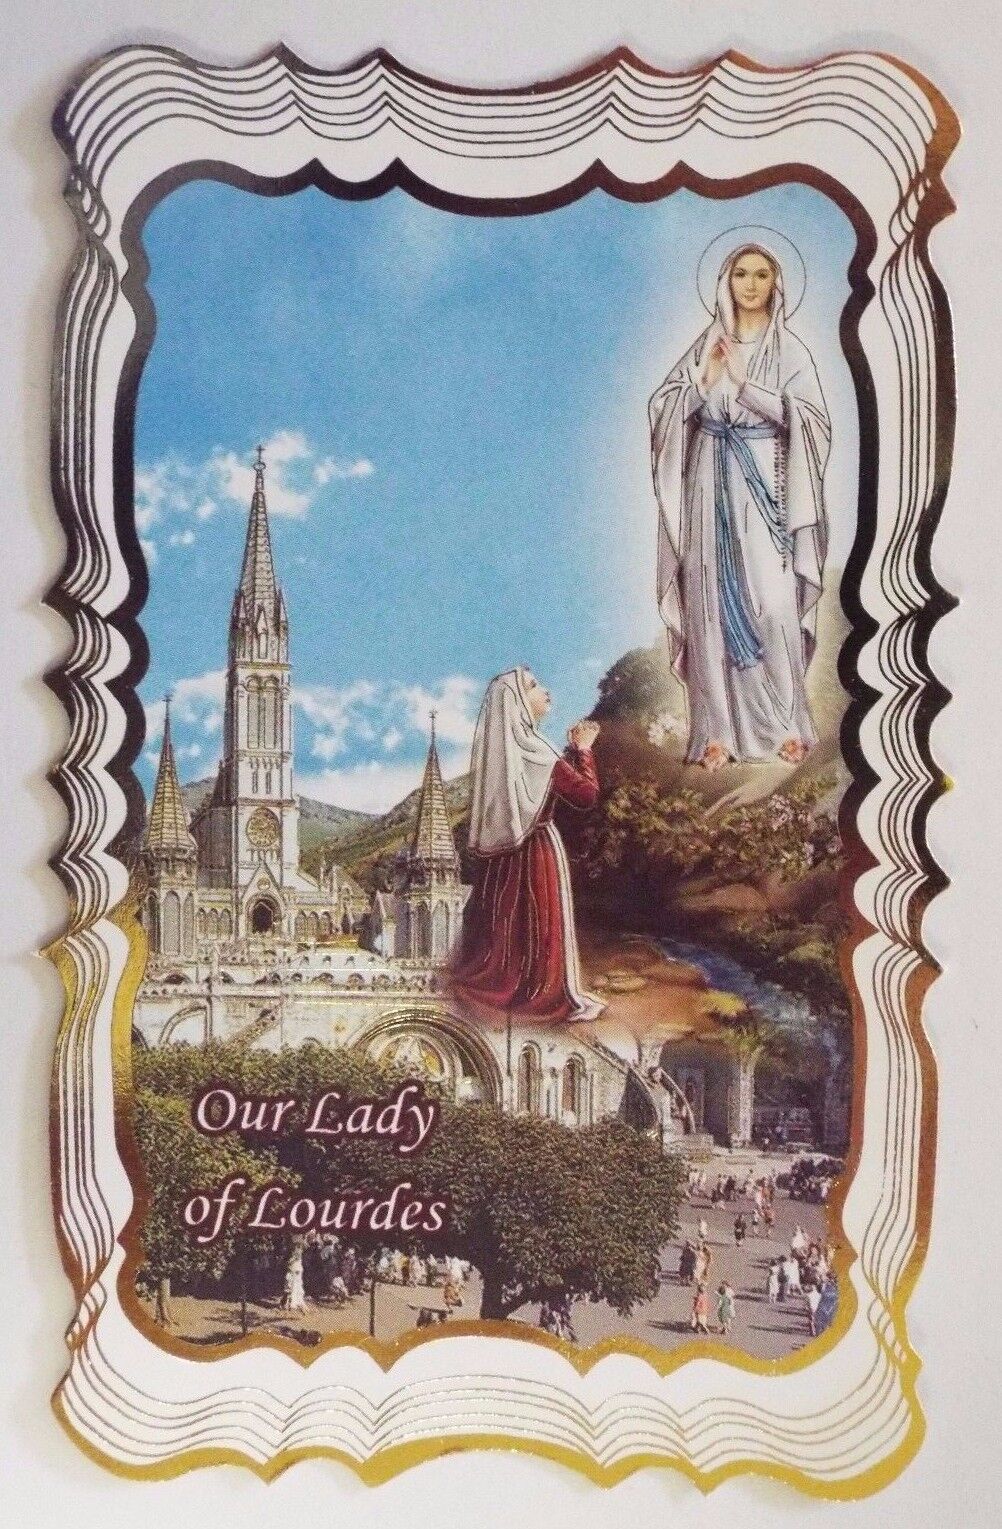 Our Lady of Lourdes Scalloped Prayer Card, from Lourdes New (3) - Bob and Penny Lord